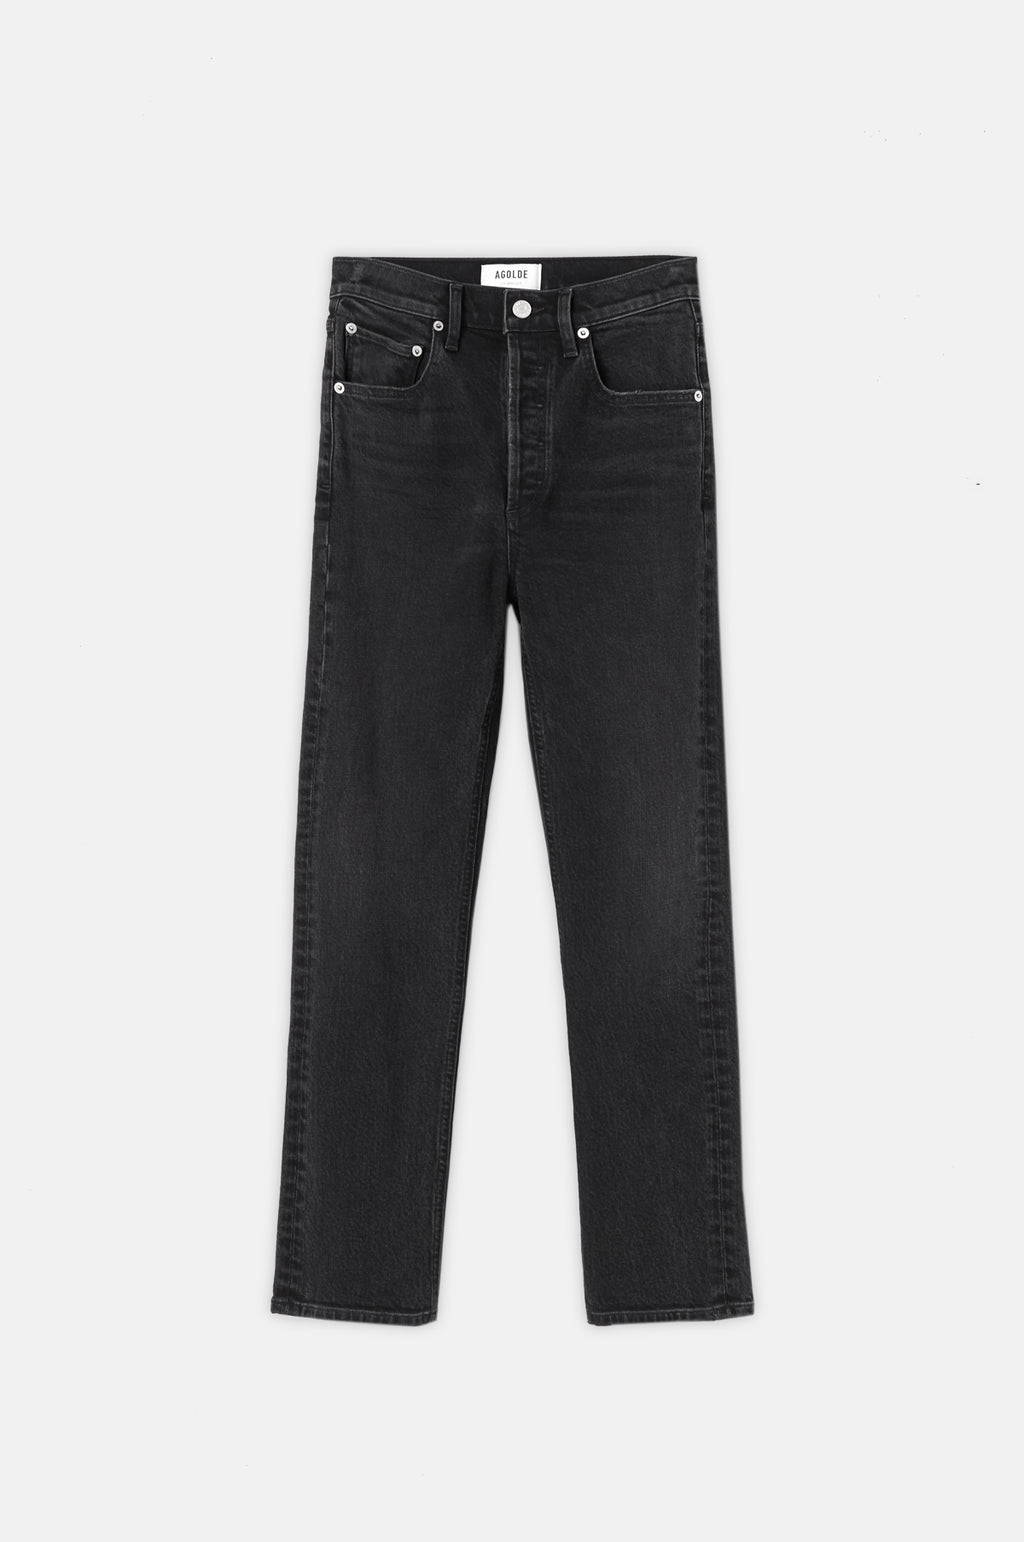 Product image of Riley Straight Jeans, full length jeans in a very dark denim with two front pockets.